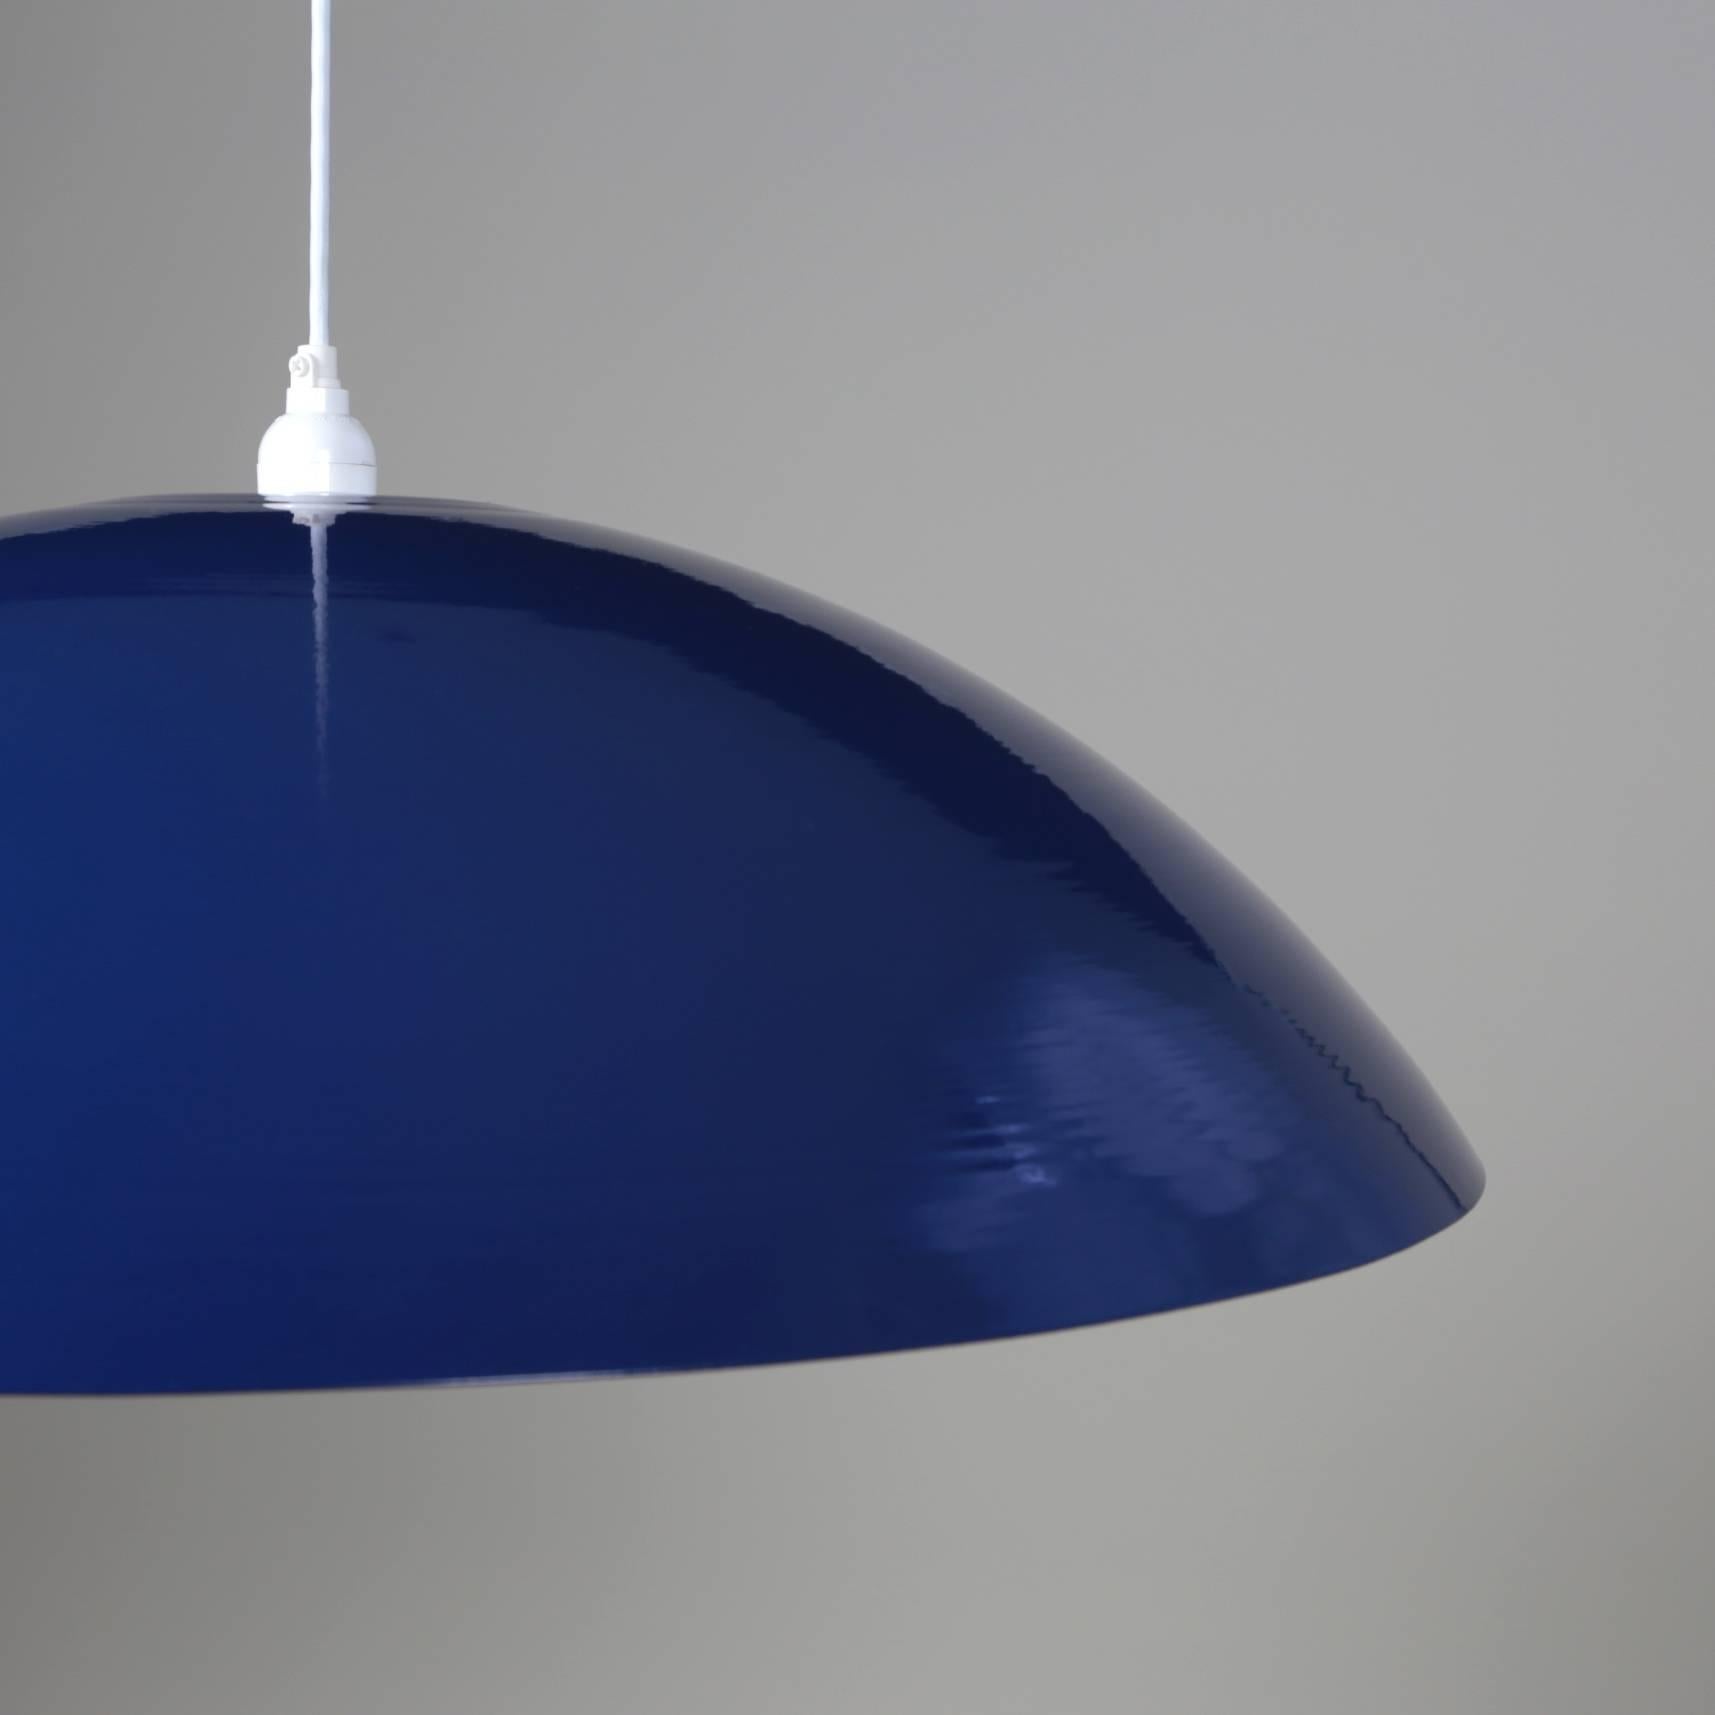 This listing is for 1x industry pendant in dark blue by RESEARCH Lighting. We can customize the color to almost any RAL color.

Materials: Aluminum
Finish: Exterior & interior is powder coated in dark blue
Electronics: 1x E26 Socket, G40 Bulb